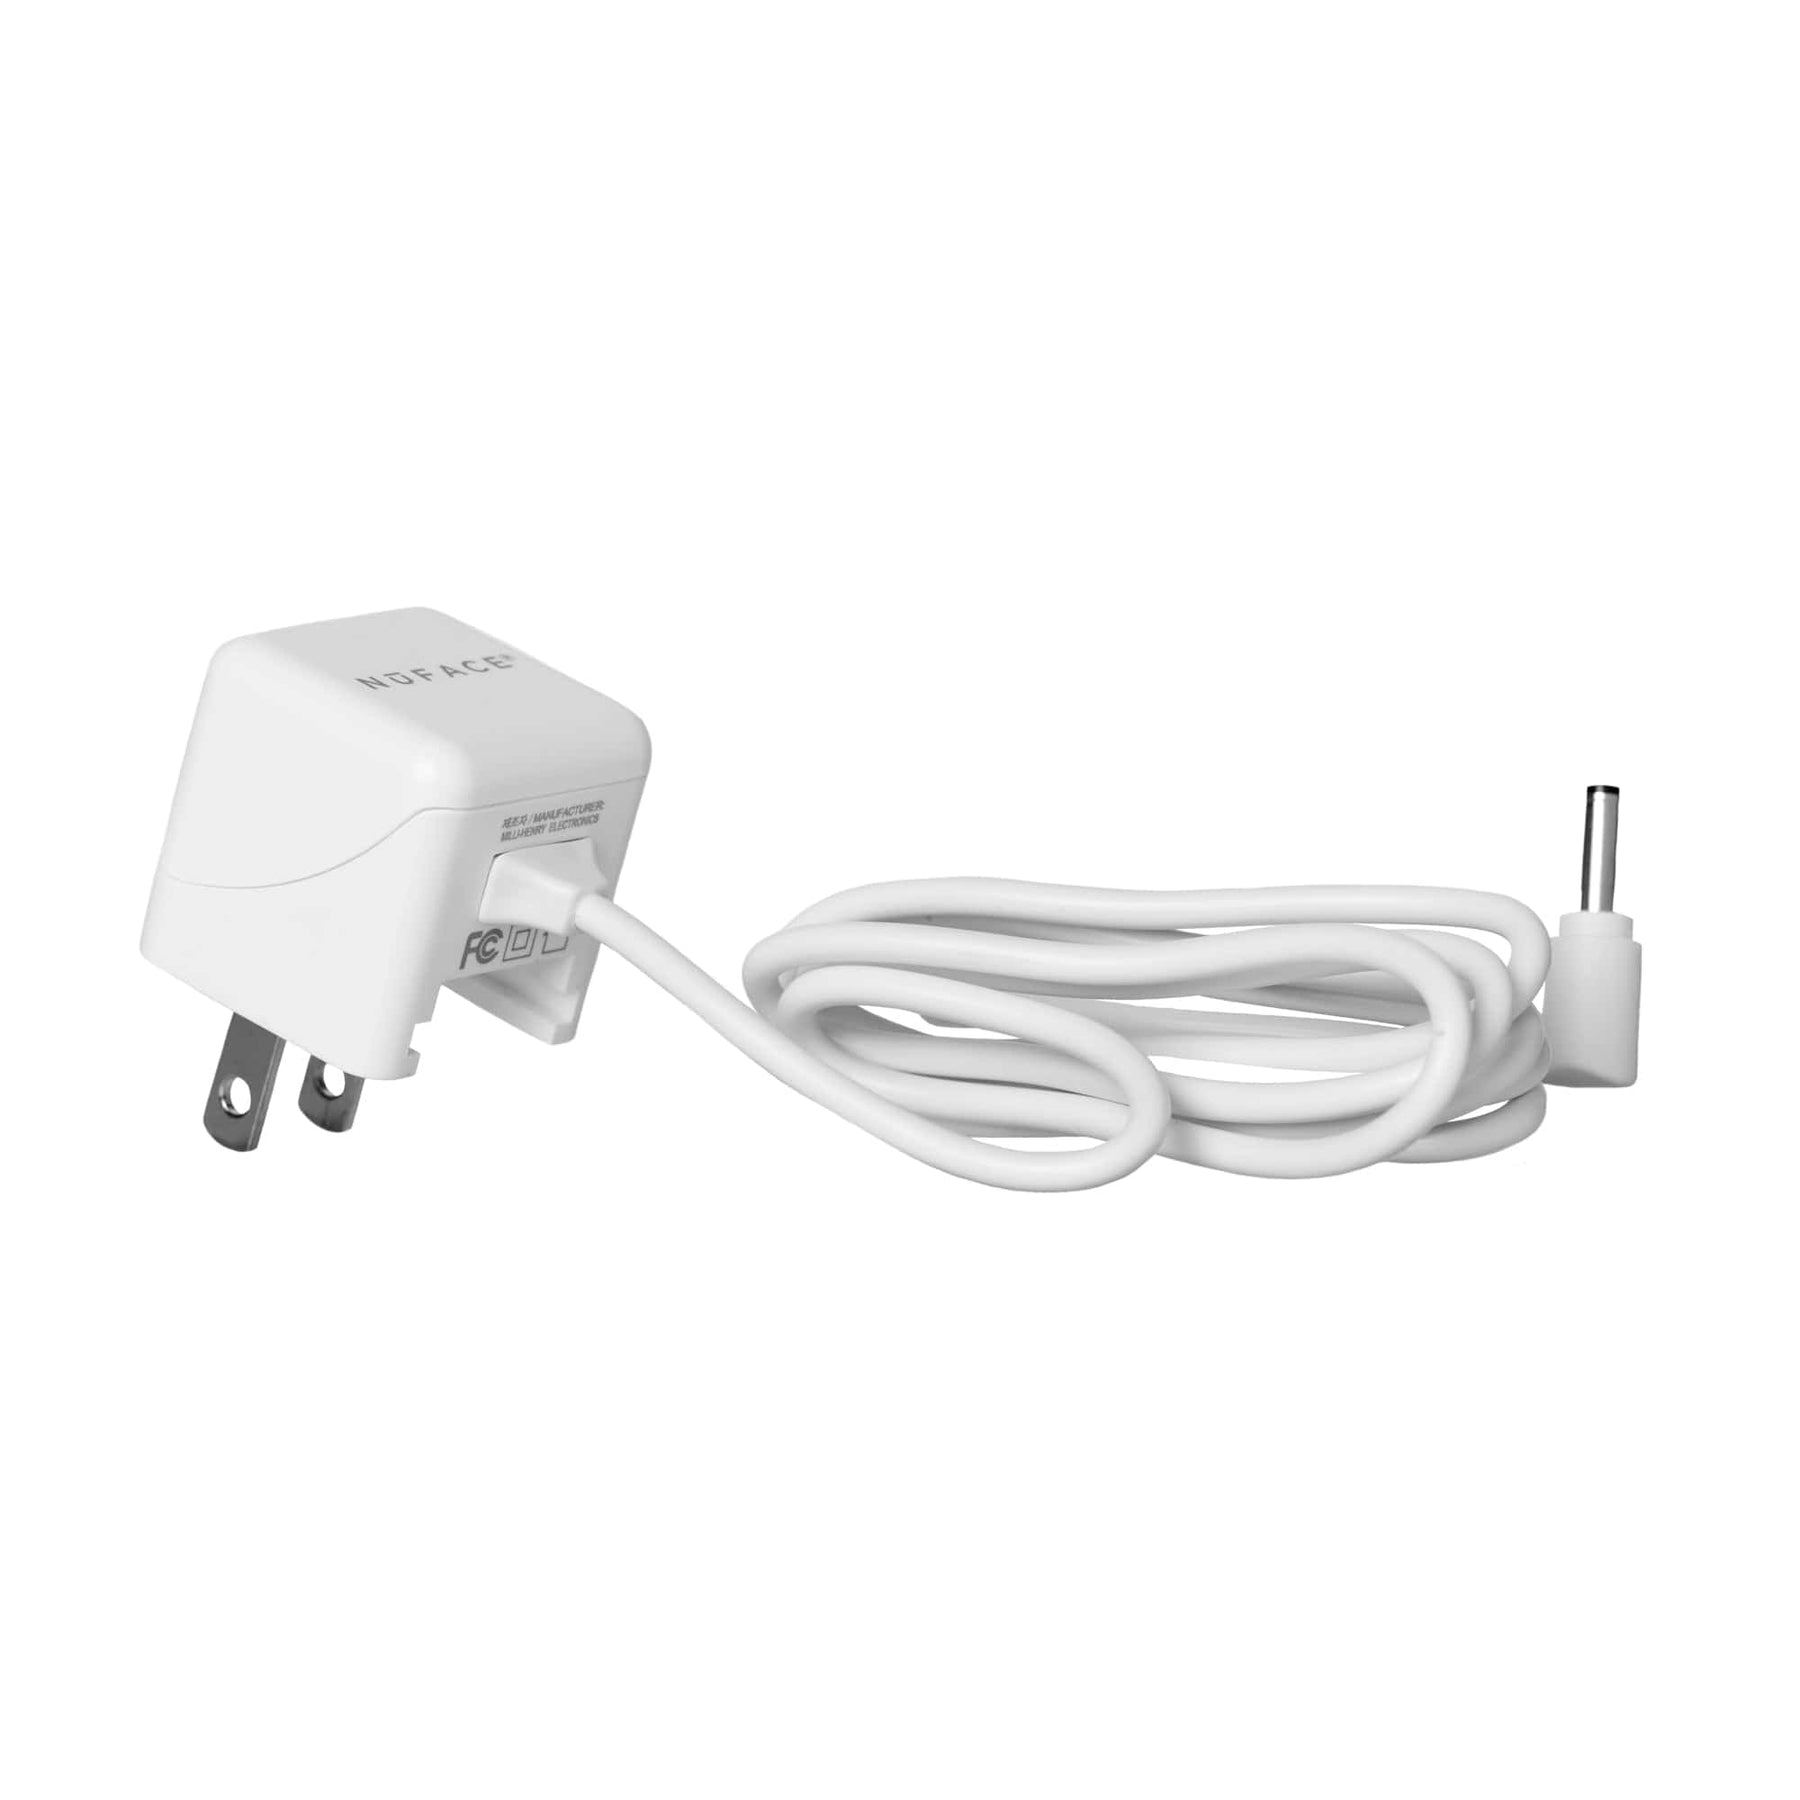 NuFACE MINI+® and NuFACE TRINITY+® External Power Adapter - Replacement Accessory